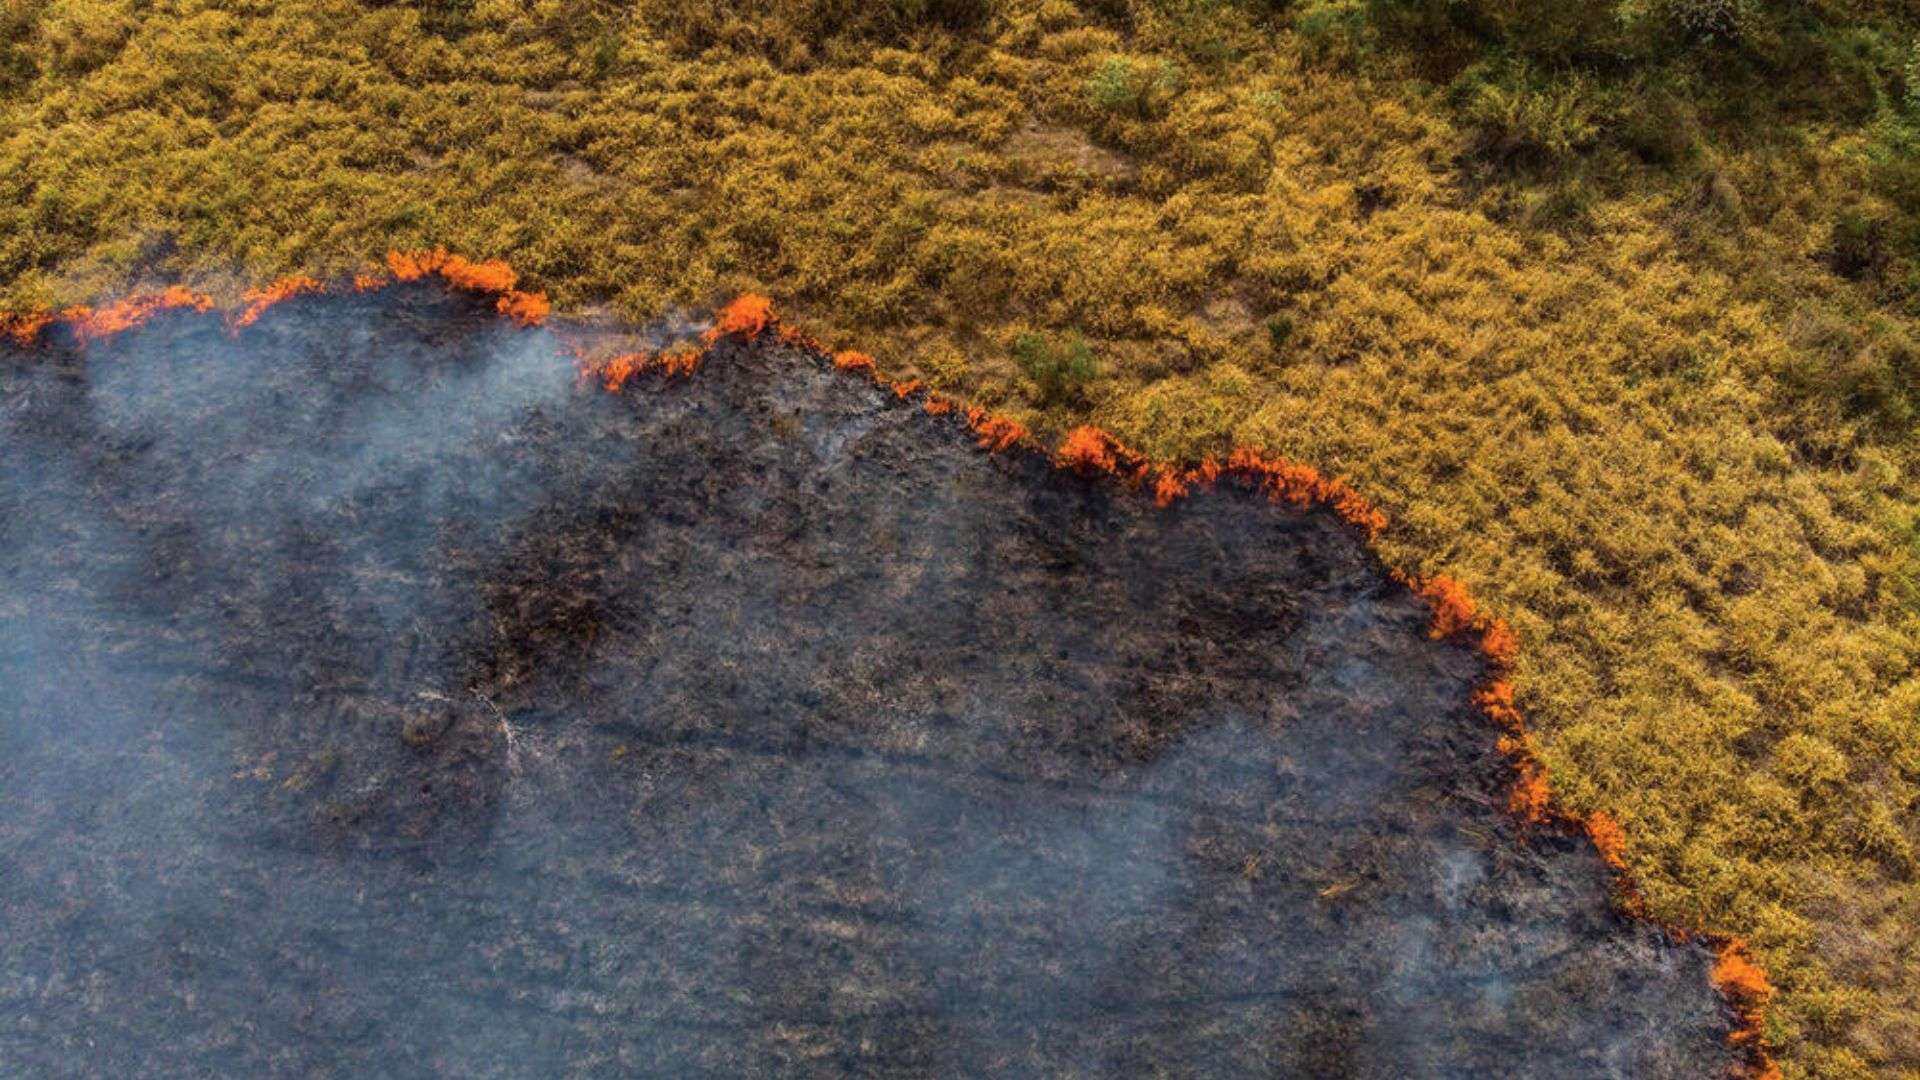 Wildfires, such as this one blazing through pastureland in Brazil, feed into the habitat fragmentation and destruction threatening jaguar populations across Latin America.